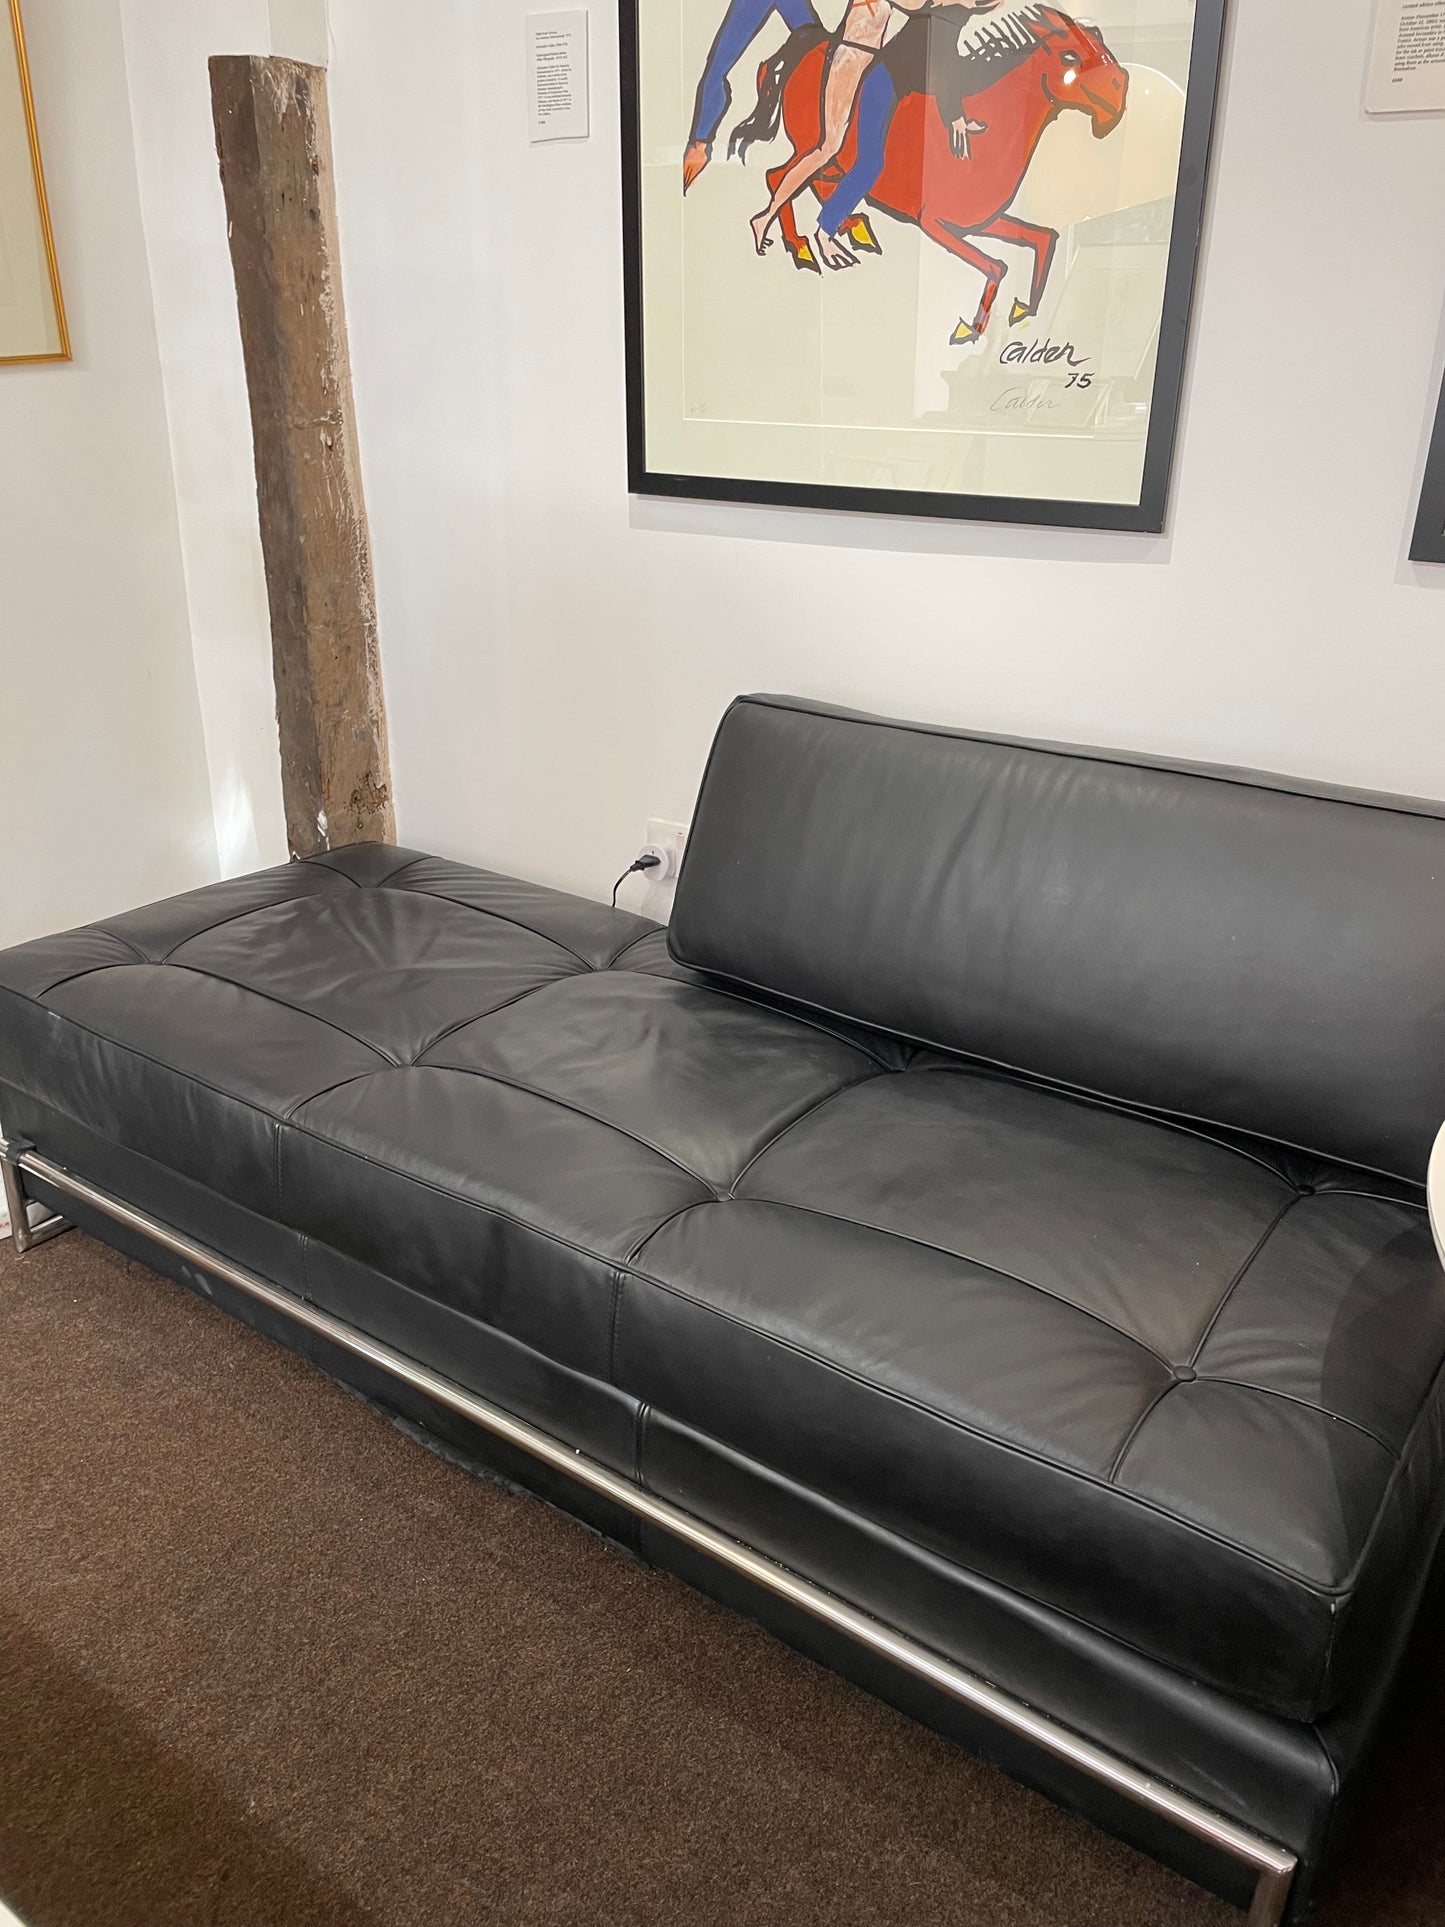 Eileen Gray Design, Black Leather Day Bed